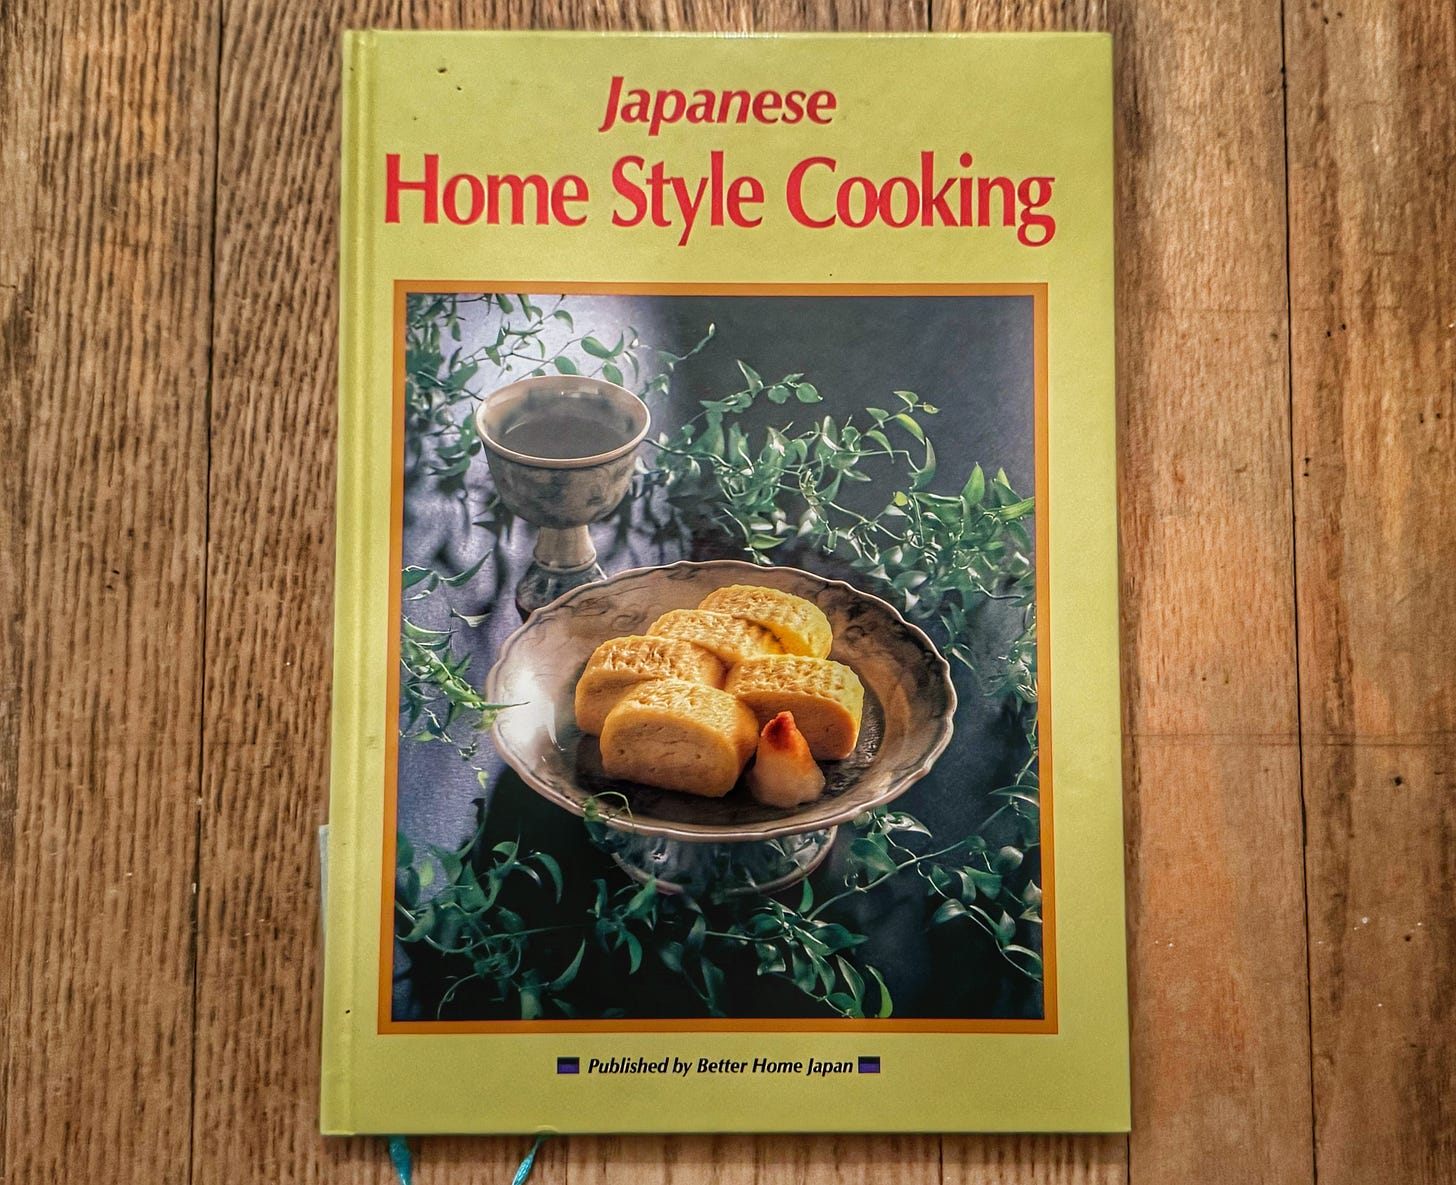 A copy of "Japanese Home Style Cooking," showing a dish with rolled-egg tamago.